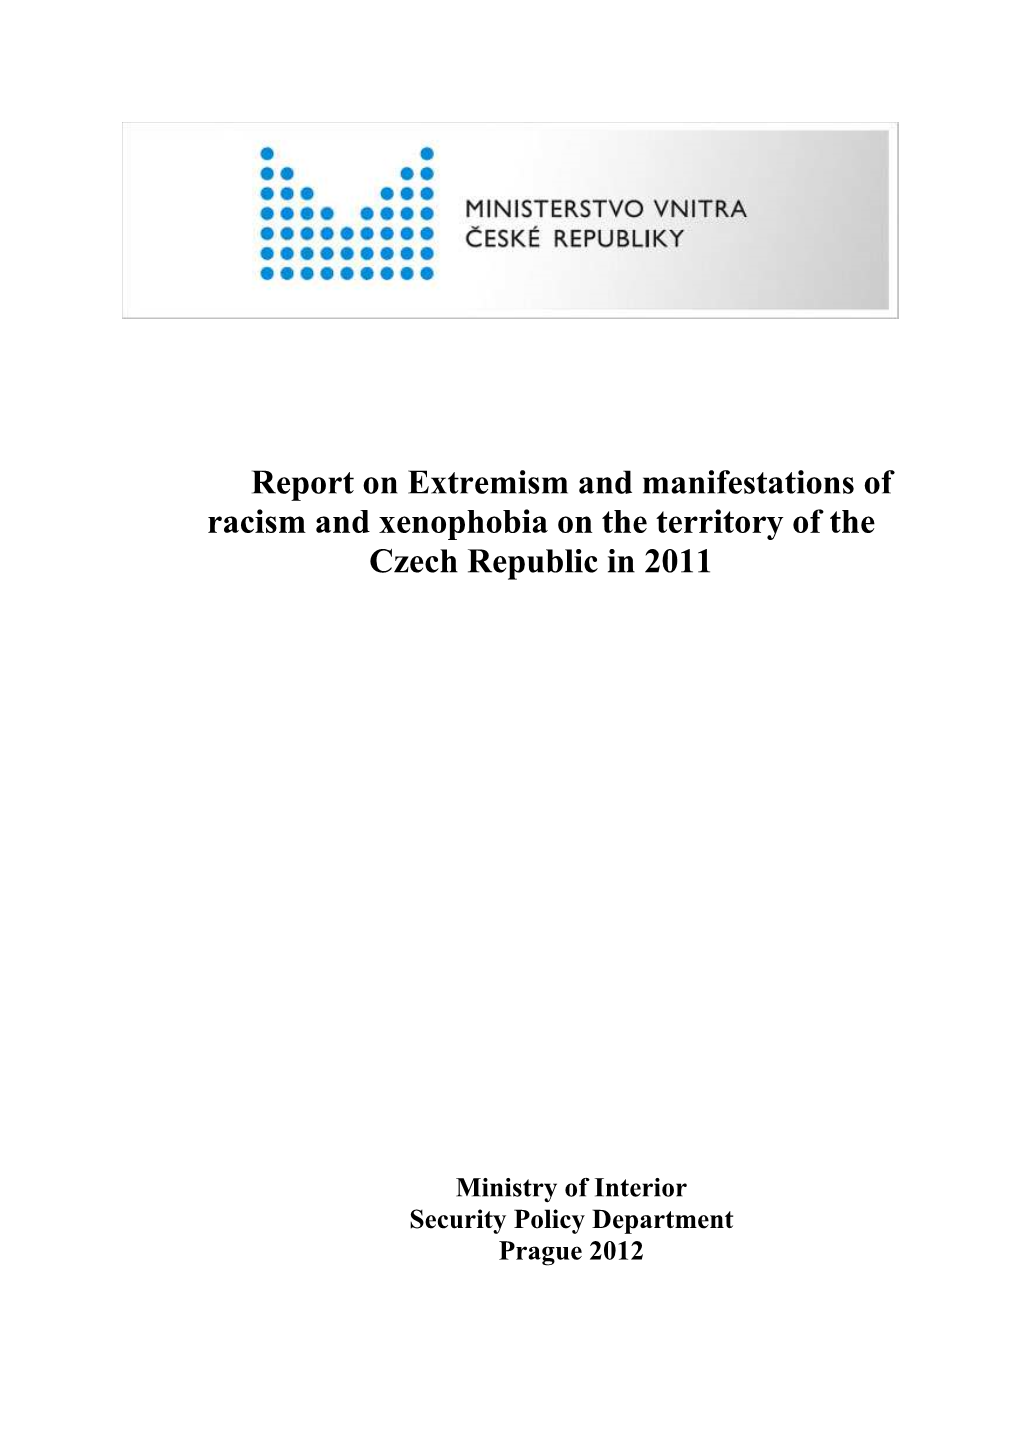 Report on Extremism and Manifestations of Racism and Xenophobia on the Territory of the Czech Republic in 2011